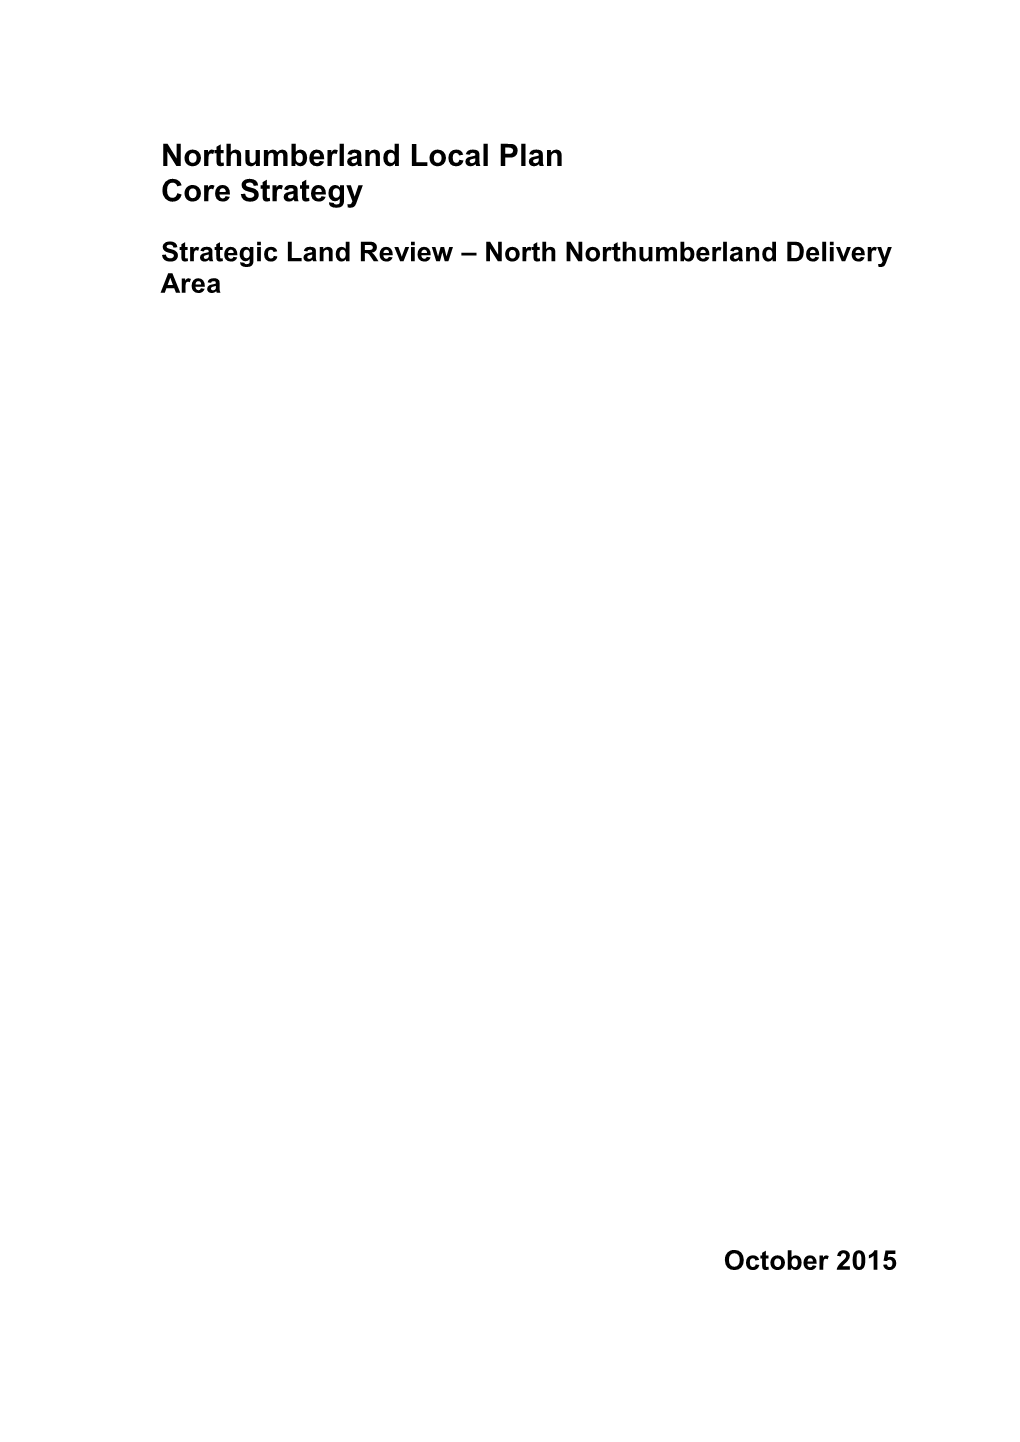 Northumberland Local Plan Core Strategy